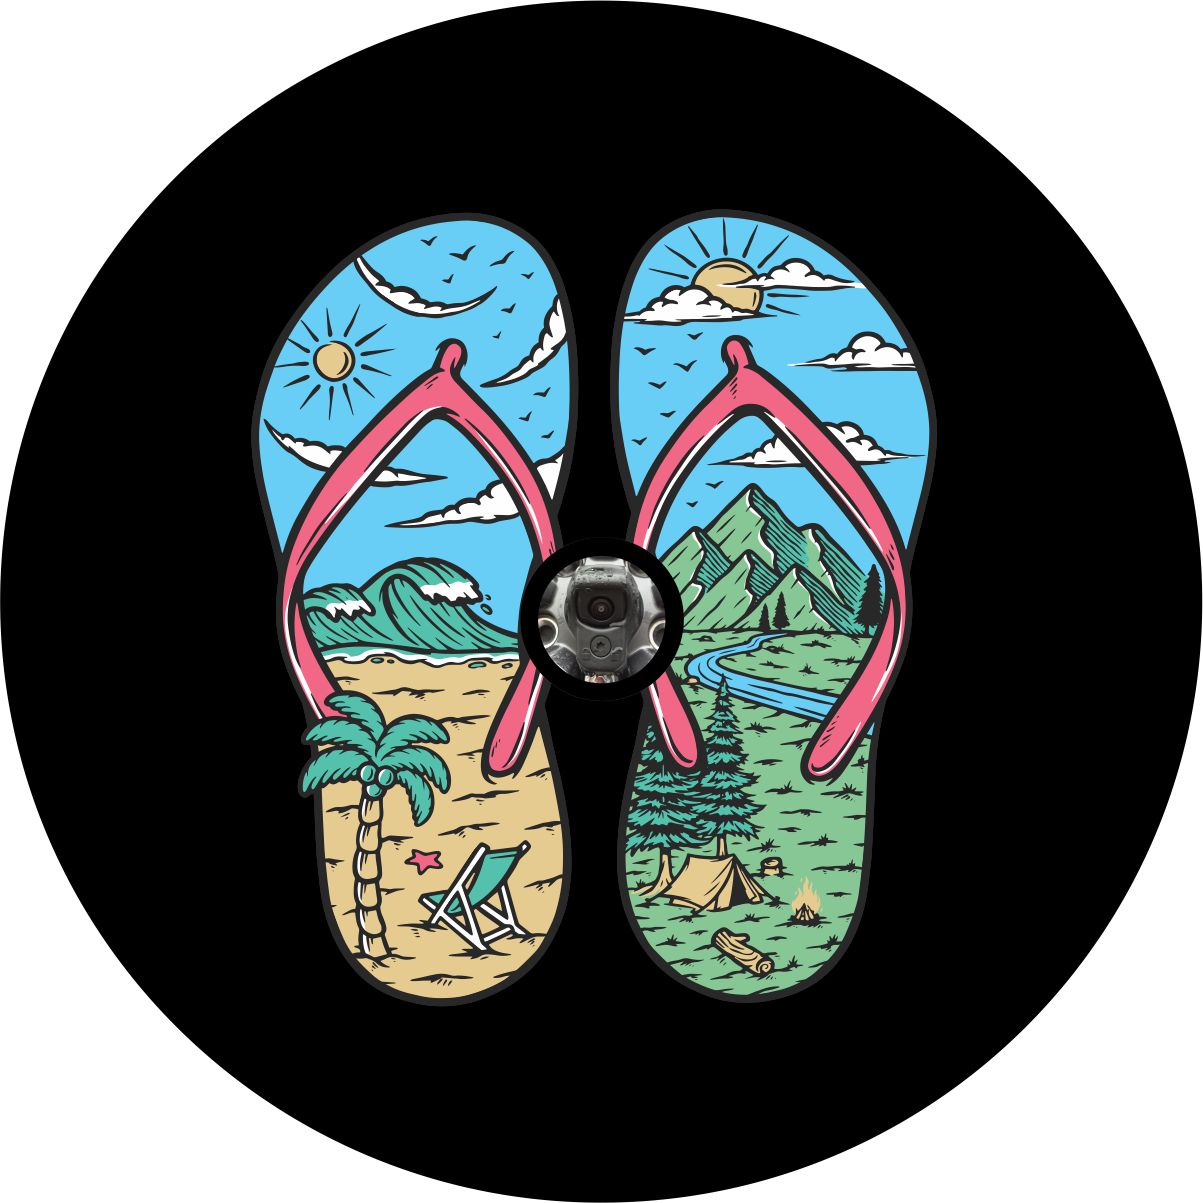 Spare tire cover for back up camera. Tire cover design with camera hole. Bright and colorful spare tire cover of flip flops with flip flopped designs of each sandal with one of a tropical beach and the other a mountain camping scene.